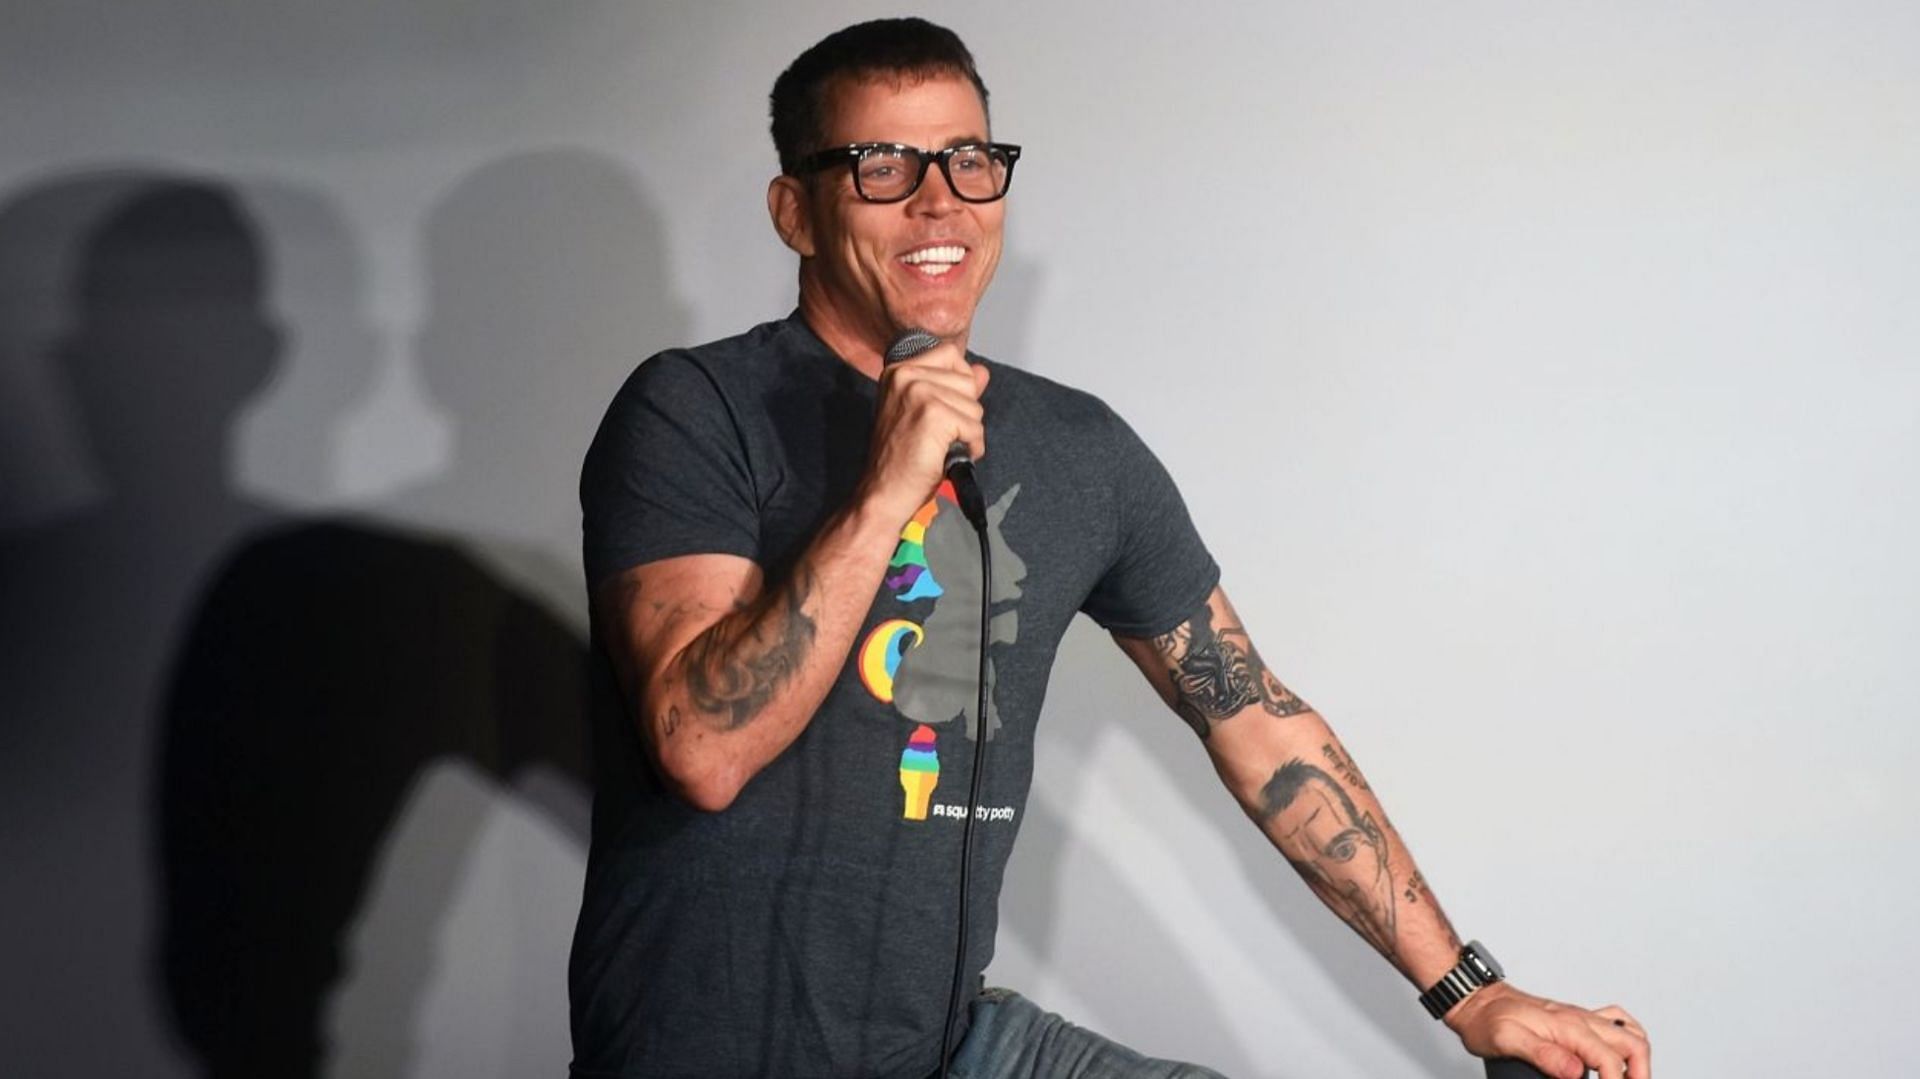 Steve O Bucket list Tour 2023 Tickets, venues, dates and more